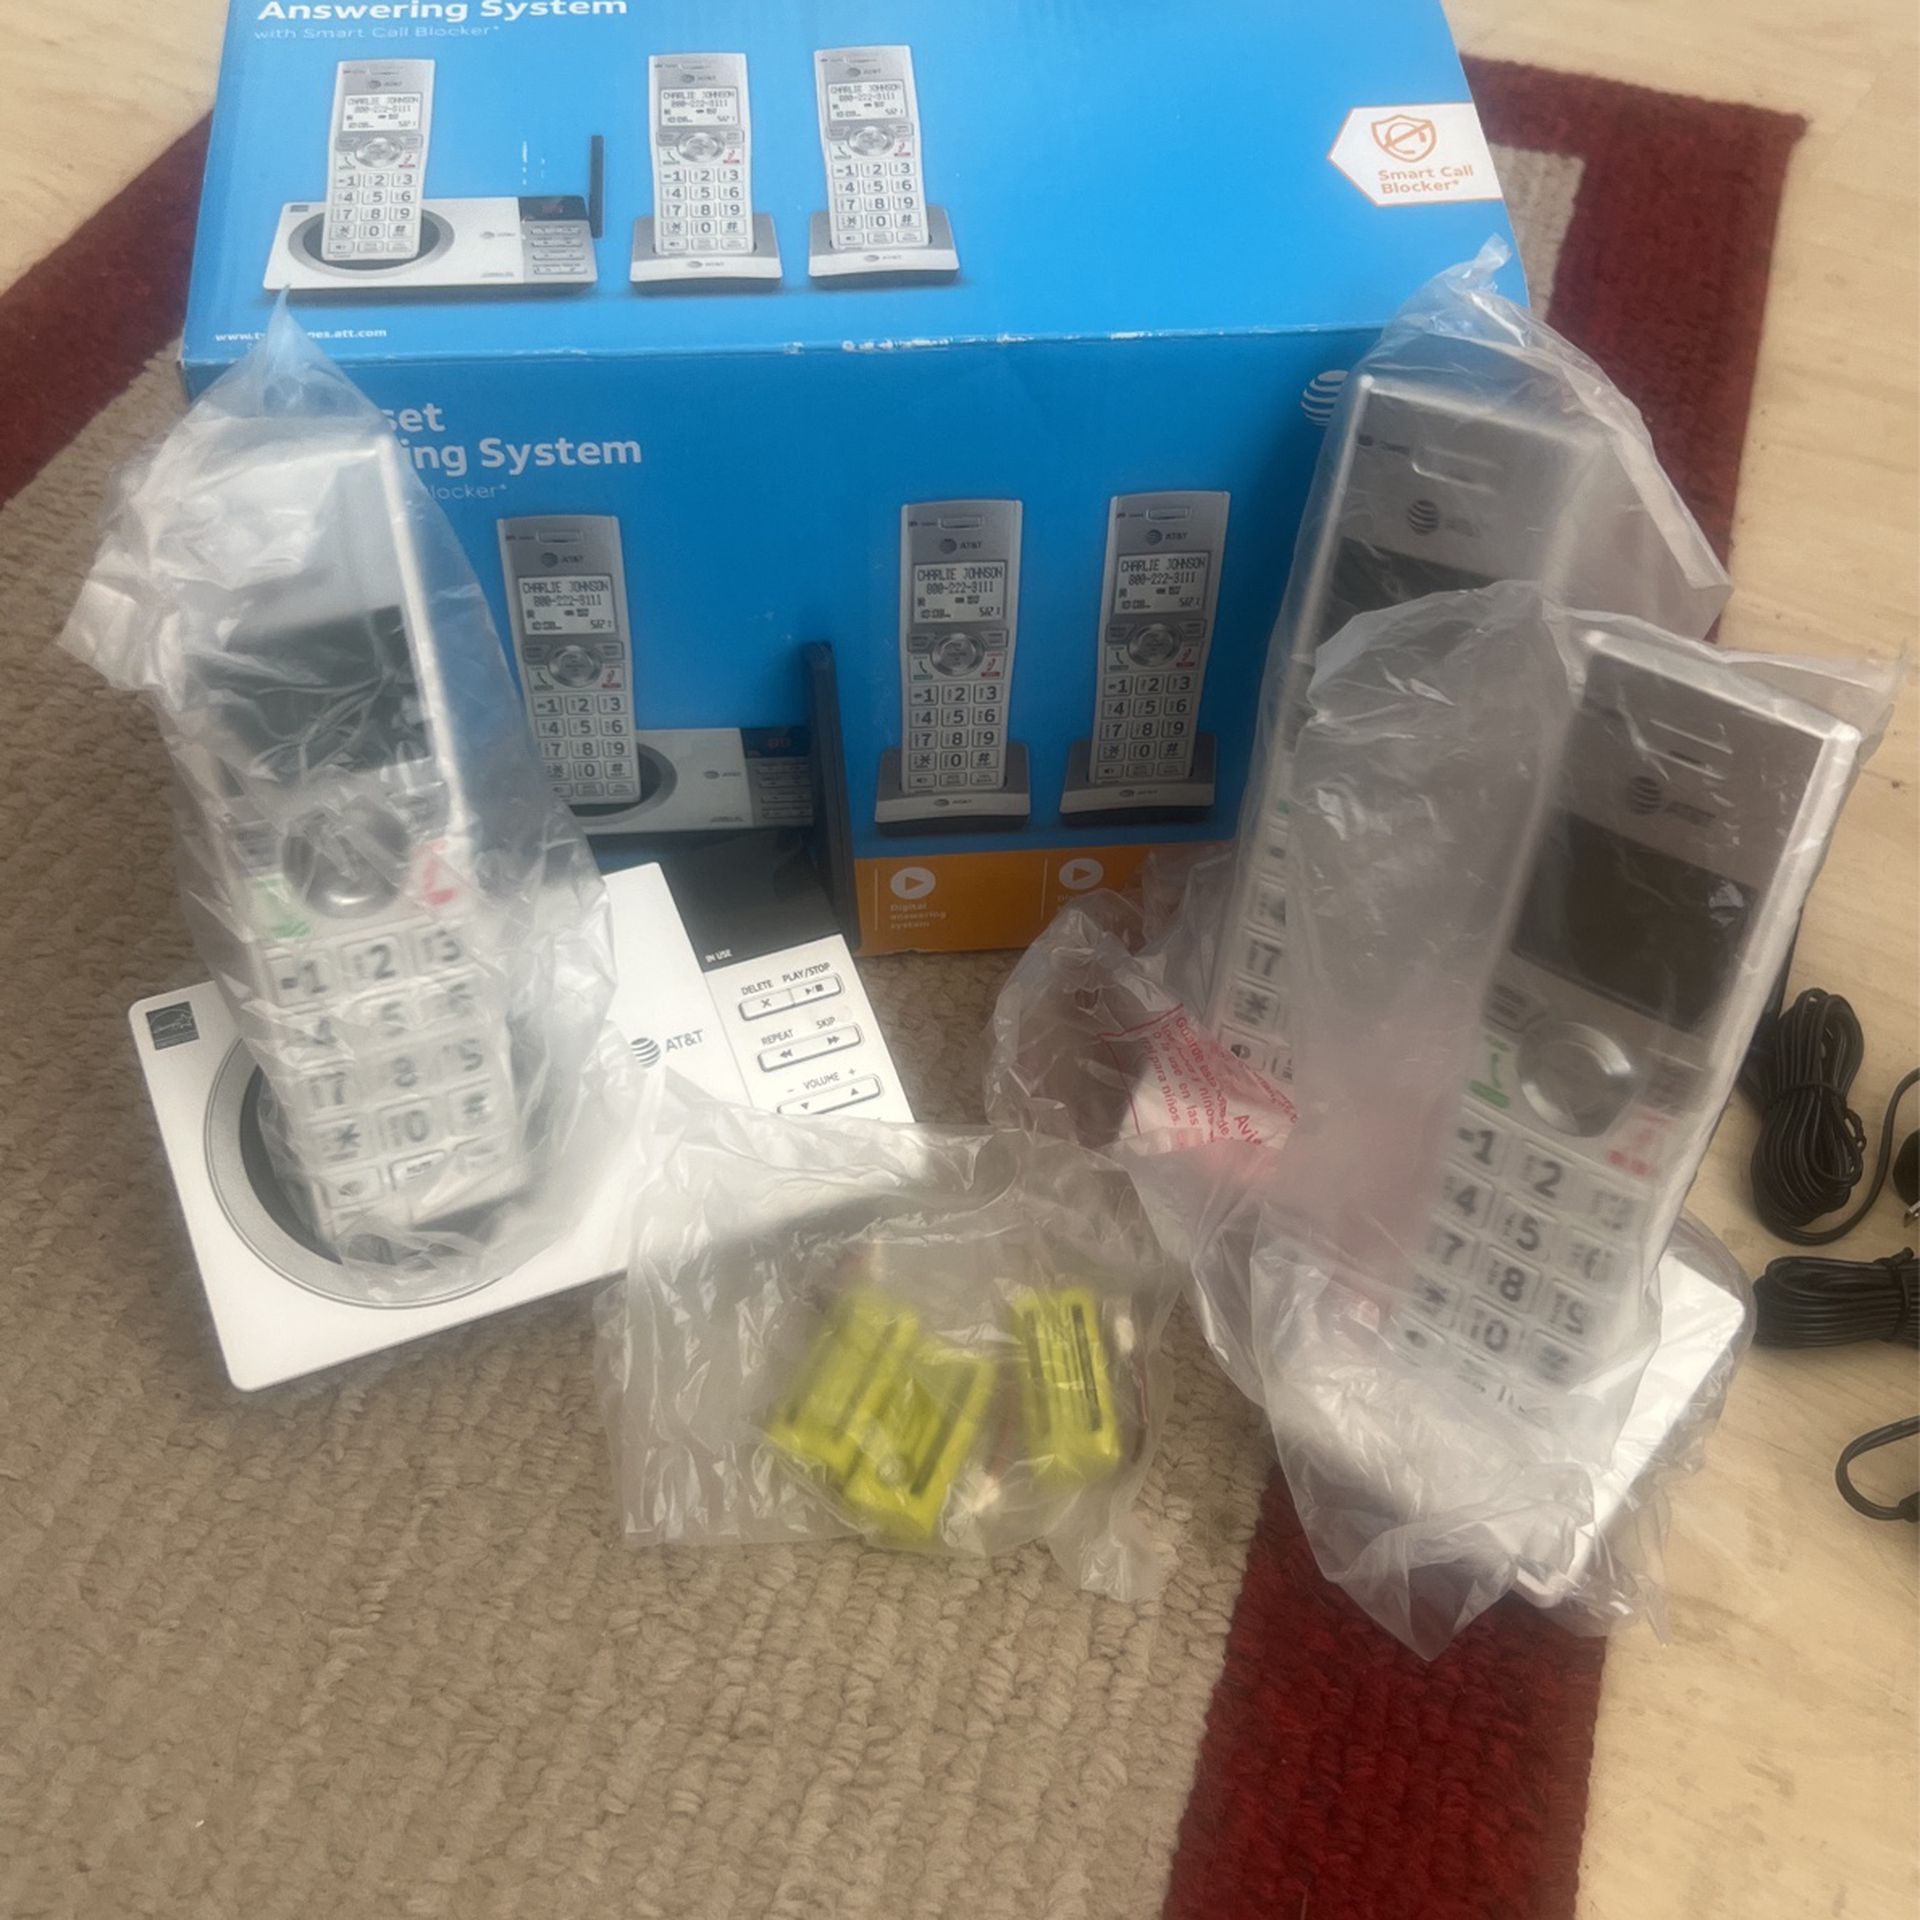 AT&T 3 Handset Answering System 